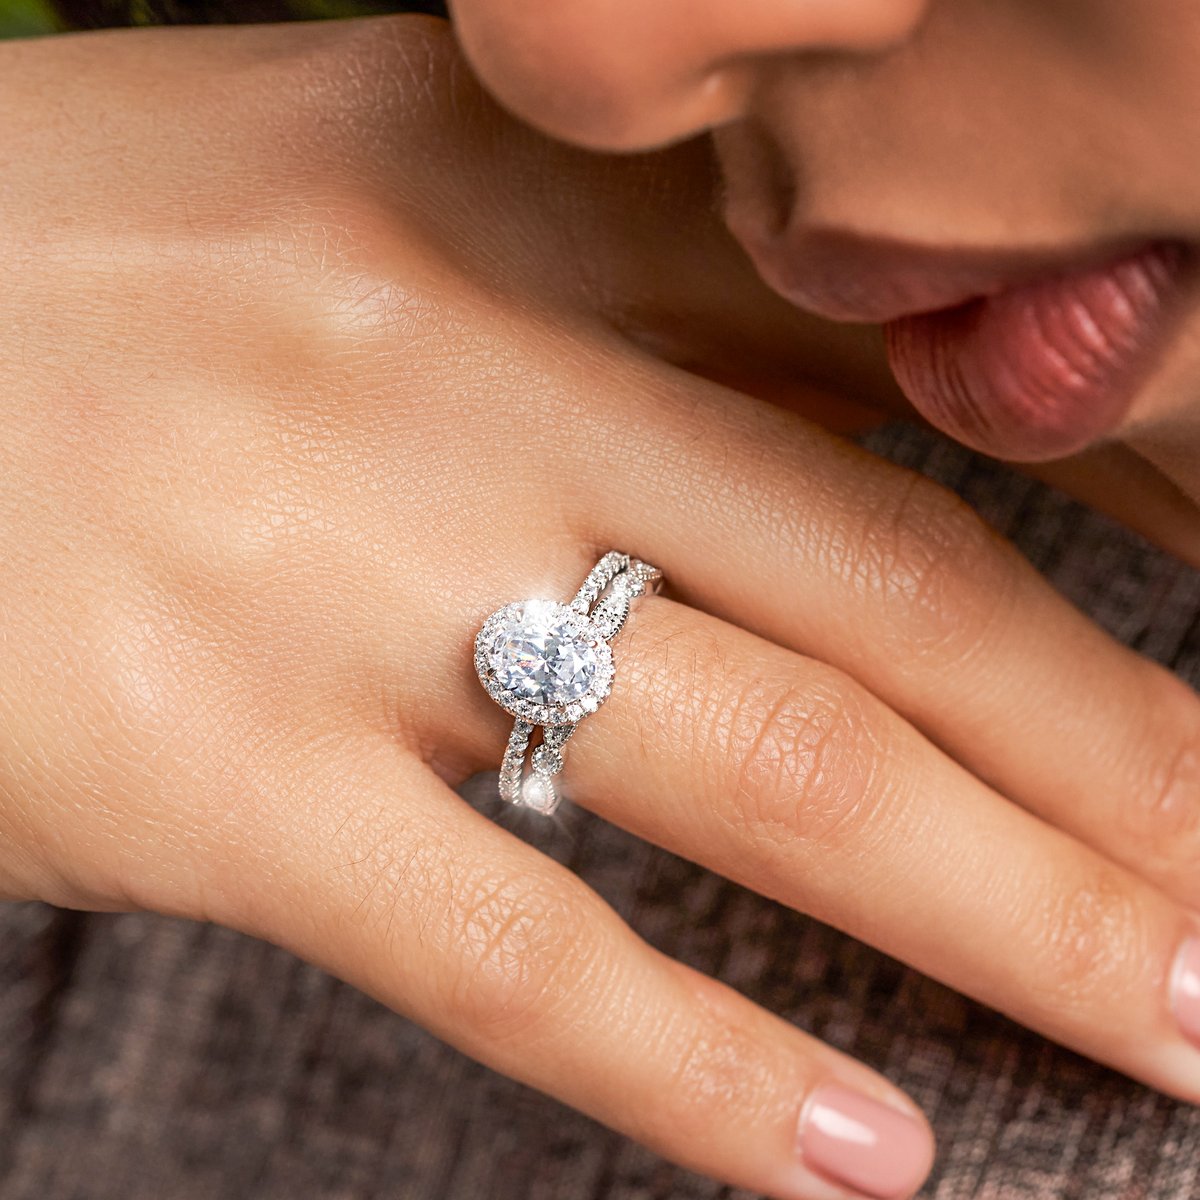 I don't think this could be more perfect, do you? 💎💎💎

Buy here: bit.ly/3adBTaL

#womenrings #weddingrings #lovejewelry #silverjewelry #sterlingsilver #cubiczirconia #besttohave #besttohavejewelry #silverring #zirconia #silver925 #engagement #wedding #bridetobe